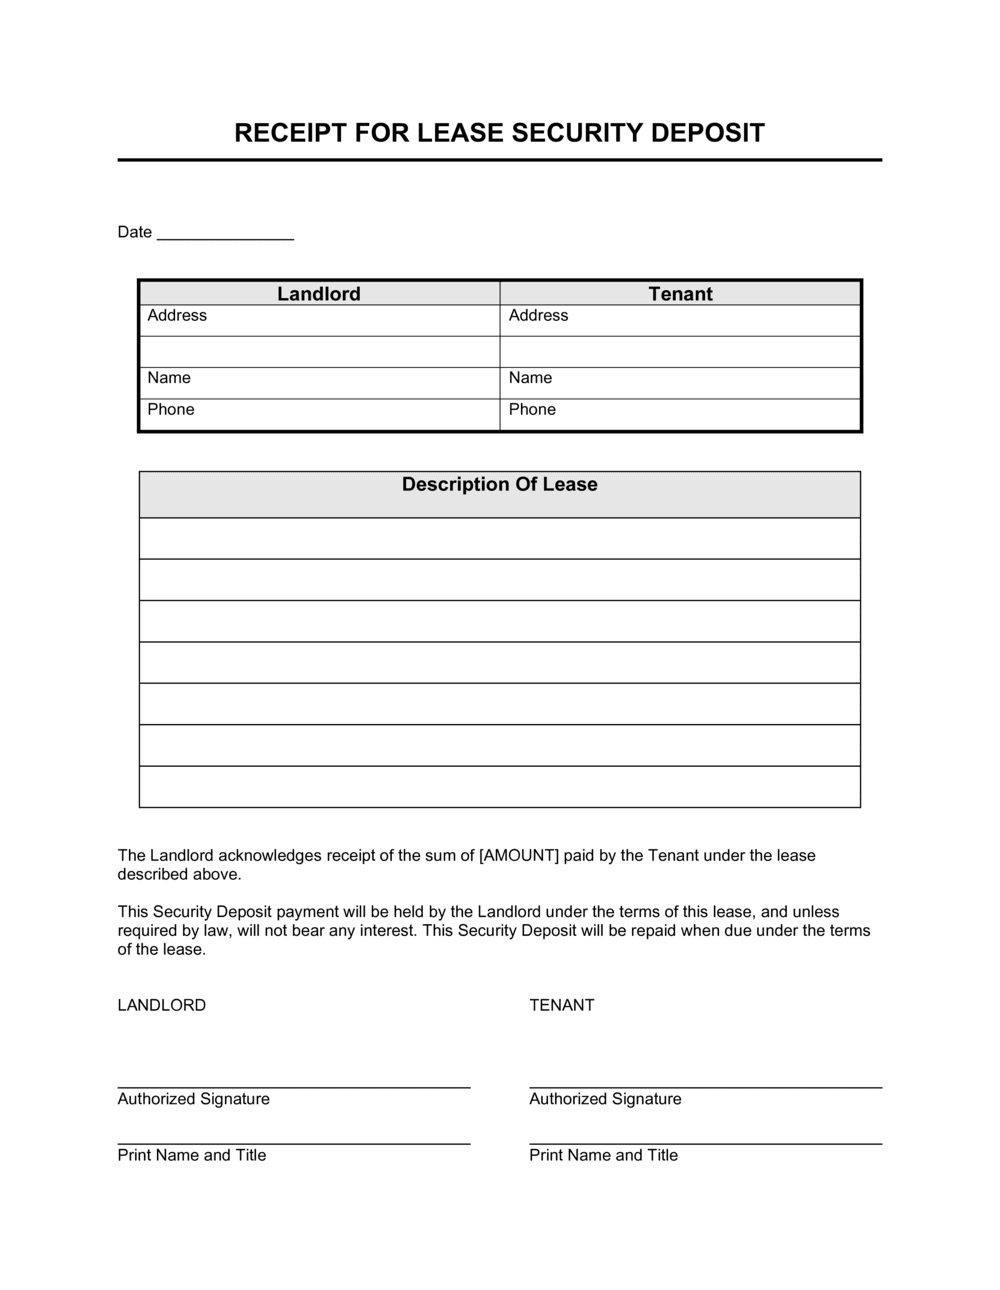 receipt-for-lease-security-deposit-template-by-business-in-a-box